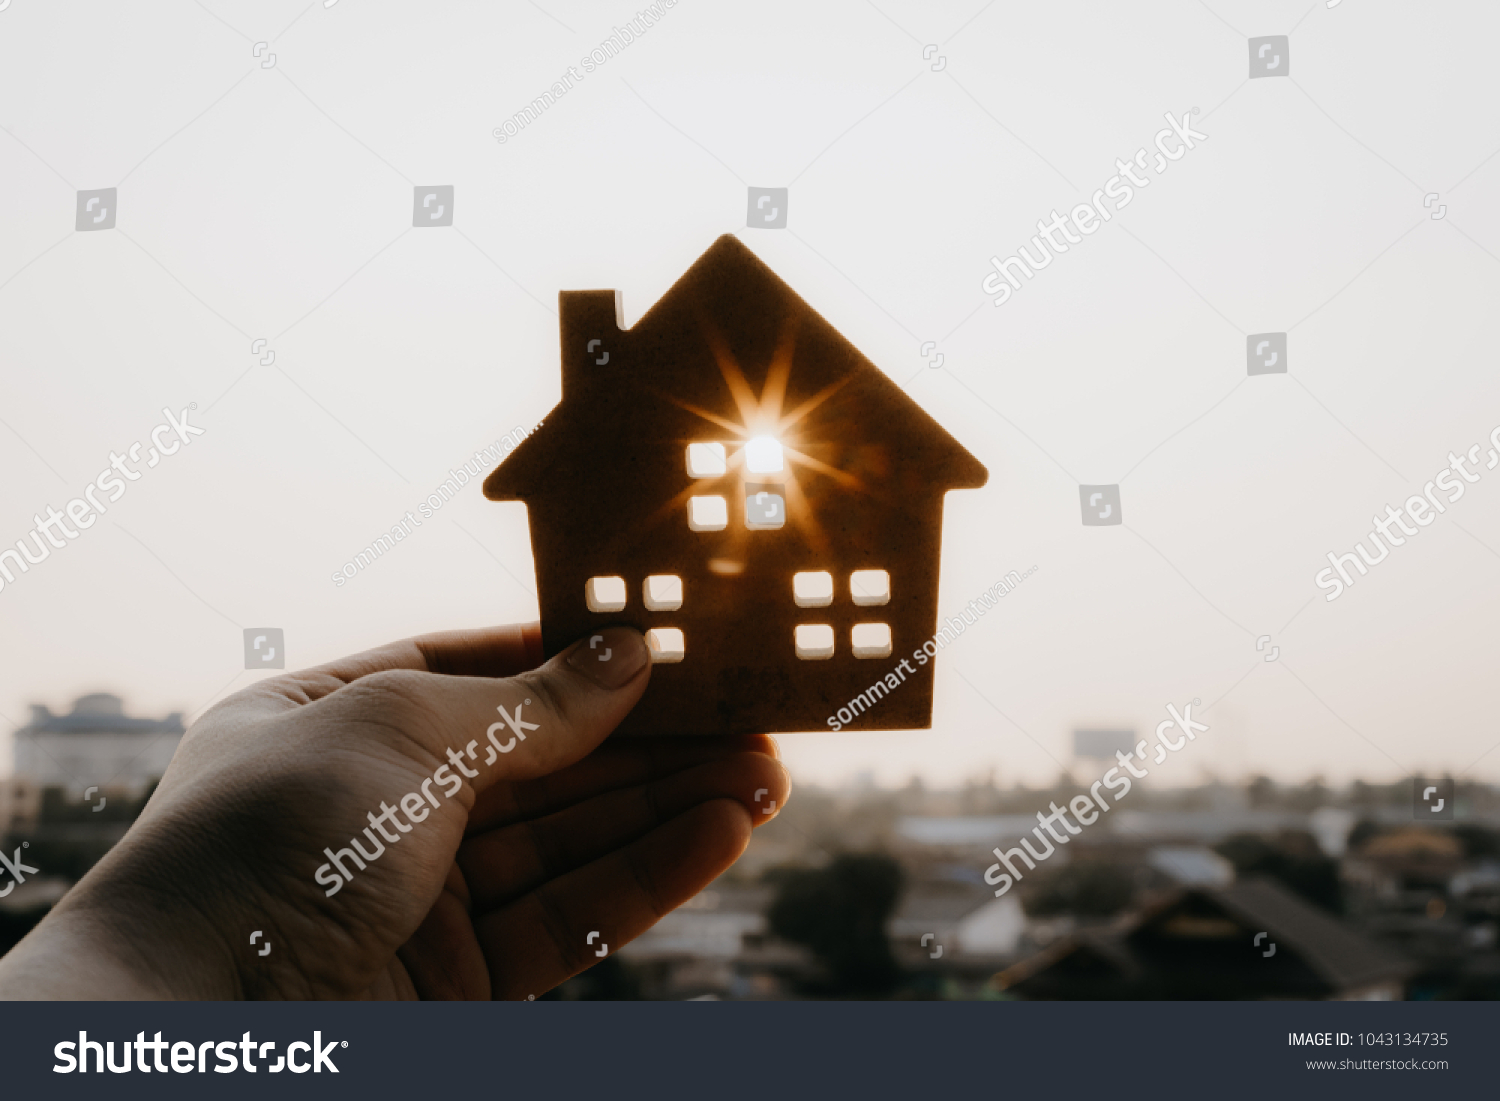 House model in home insurance broker agent ‘s hand or in salesman person. Real estate agent offer house, property insurance and security, affordable housing concepts #1043134735